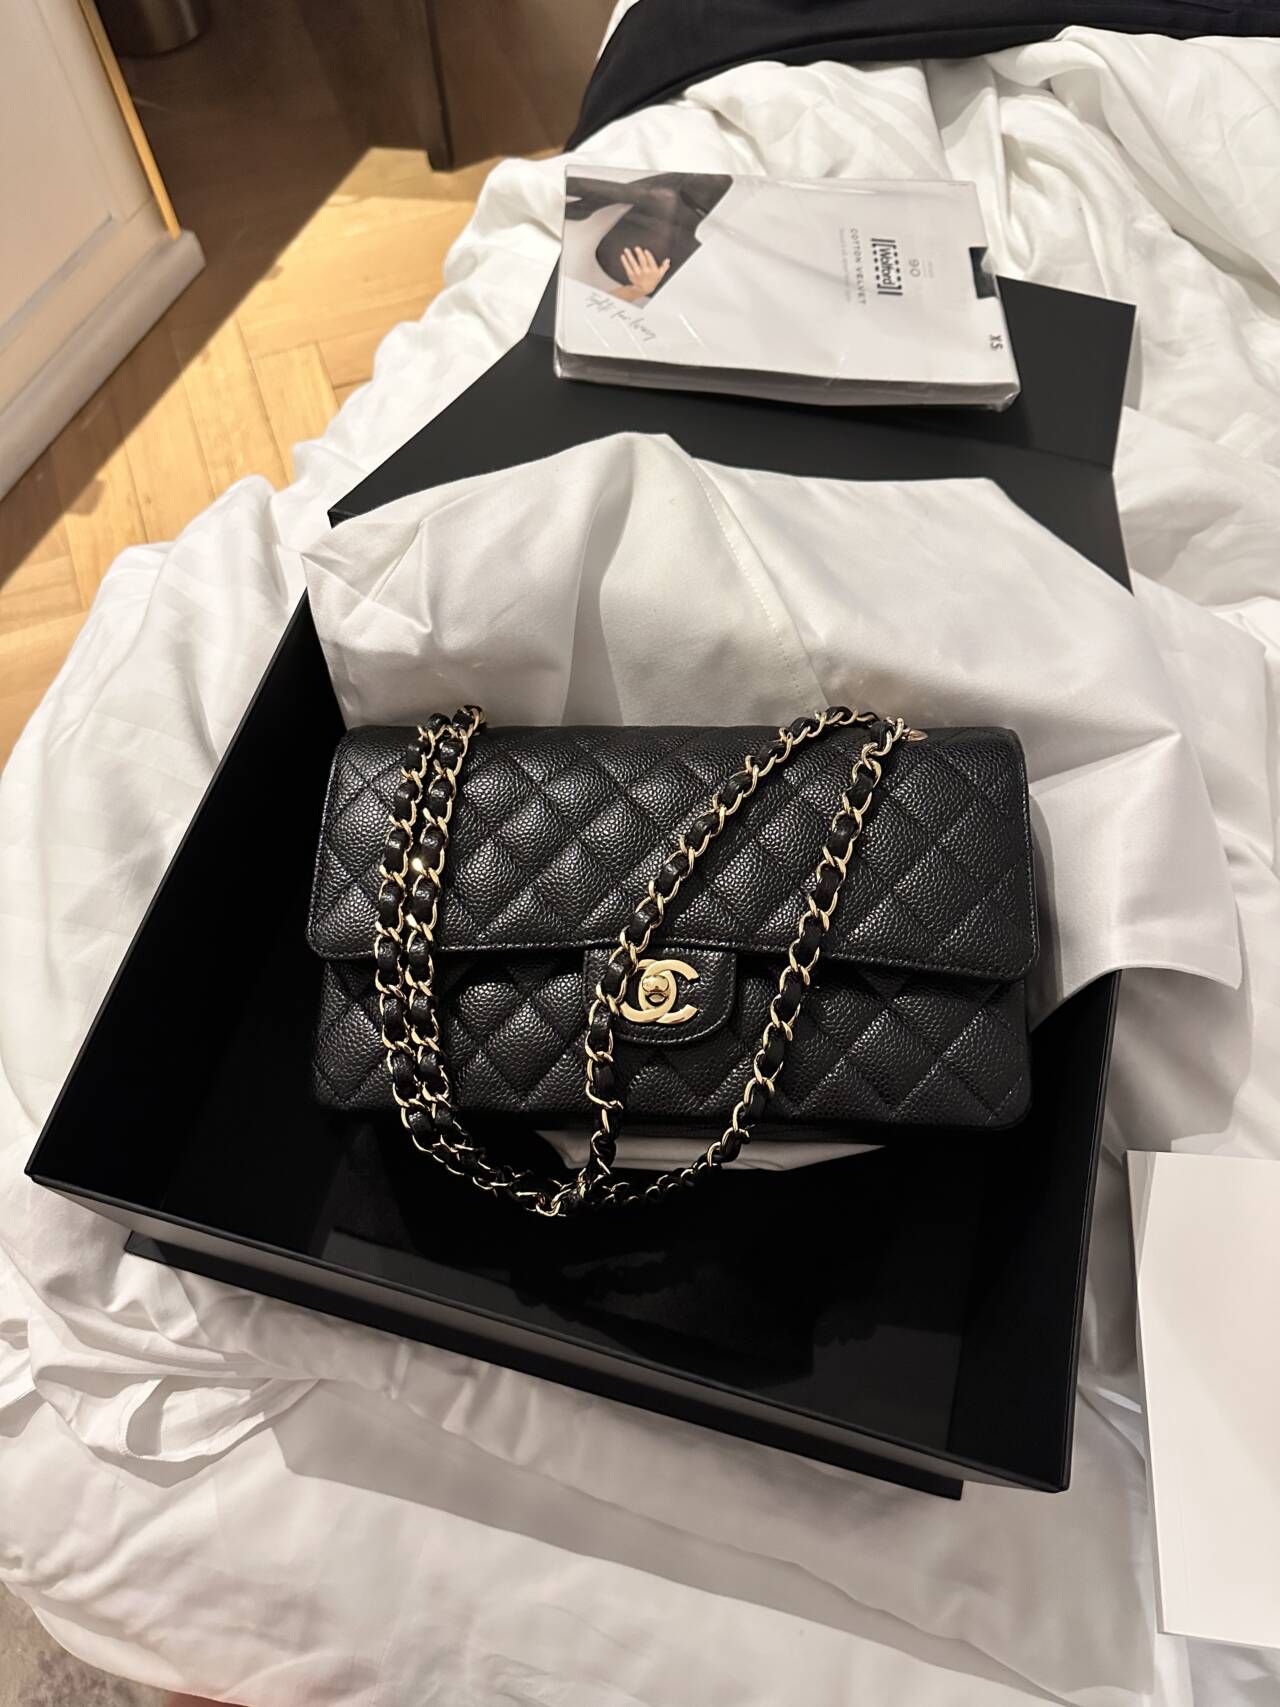 Chanel leather.. Caviar , aged calf, lambskin What do you